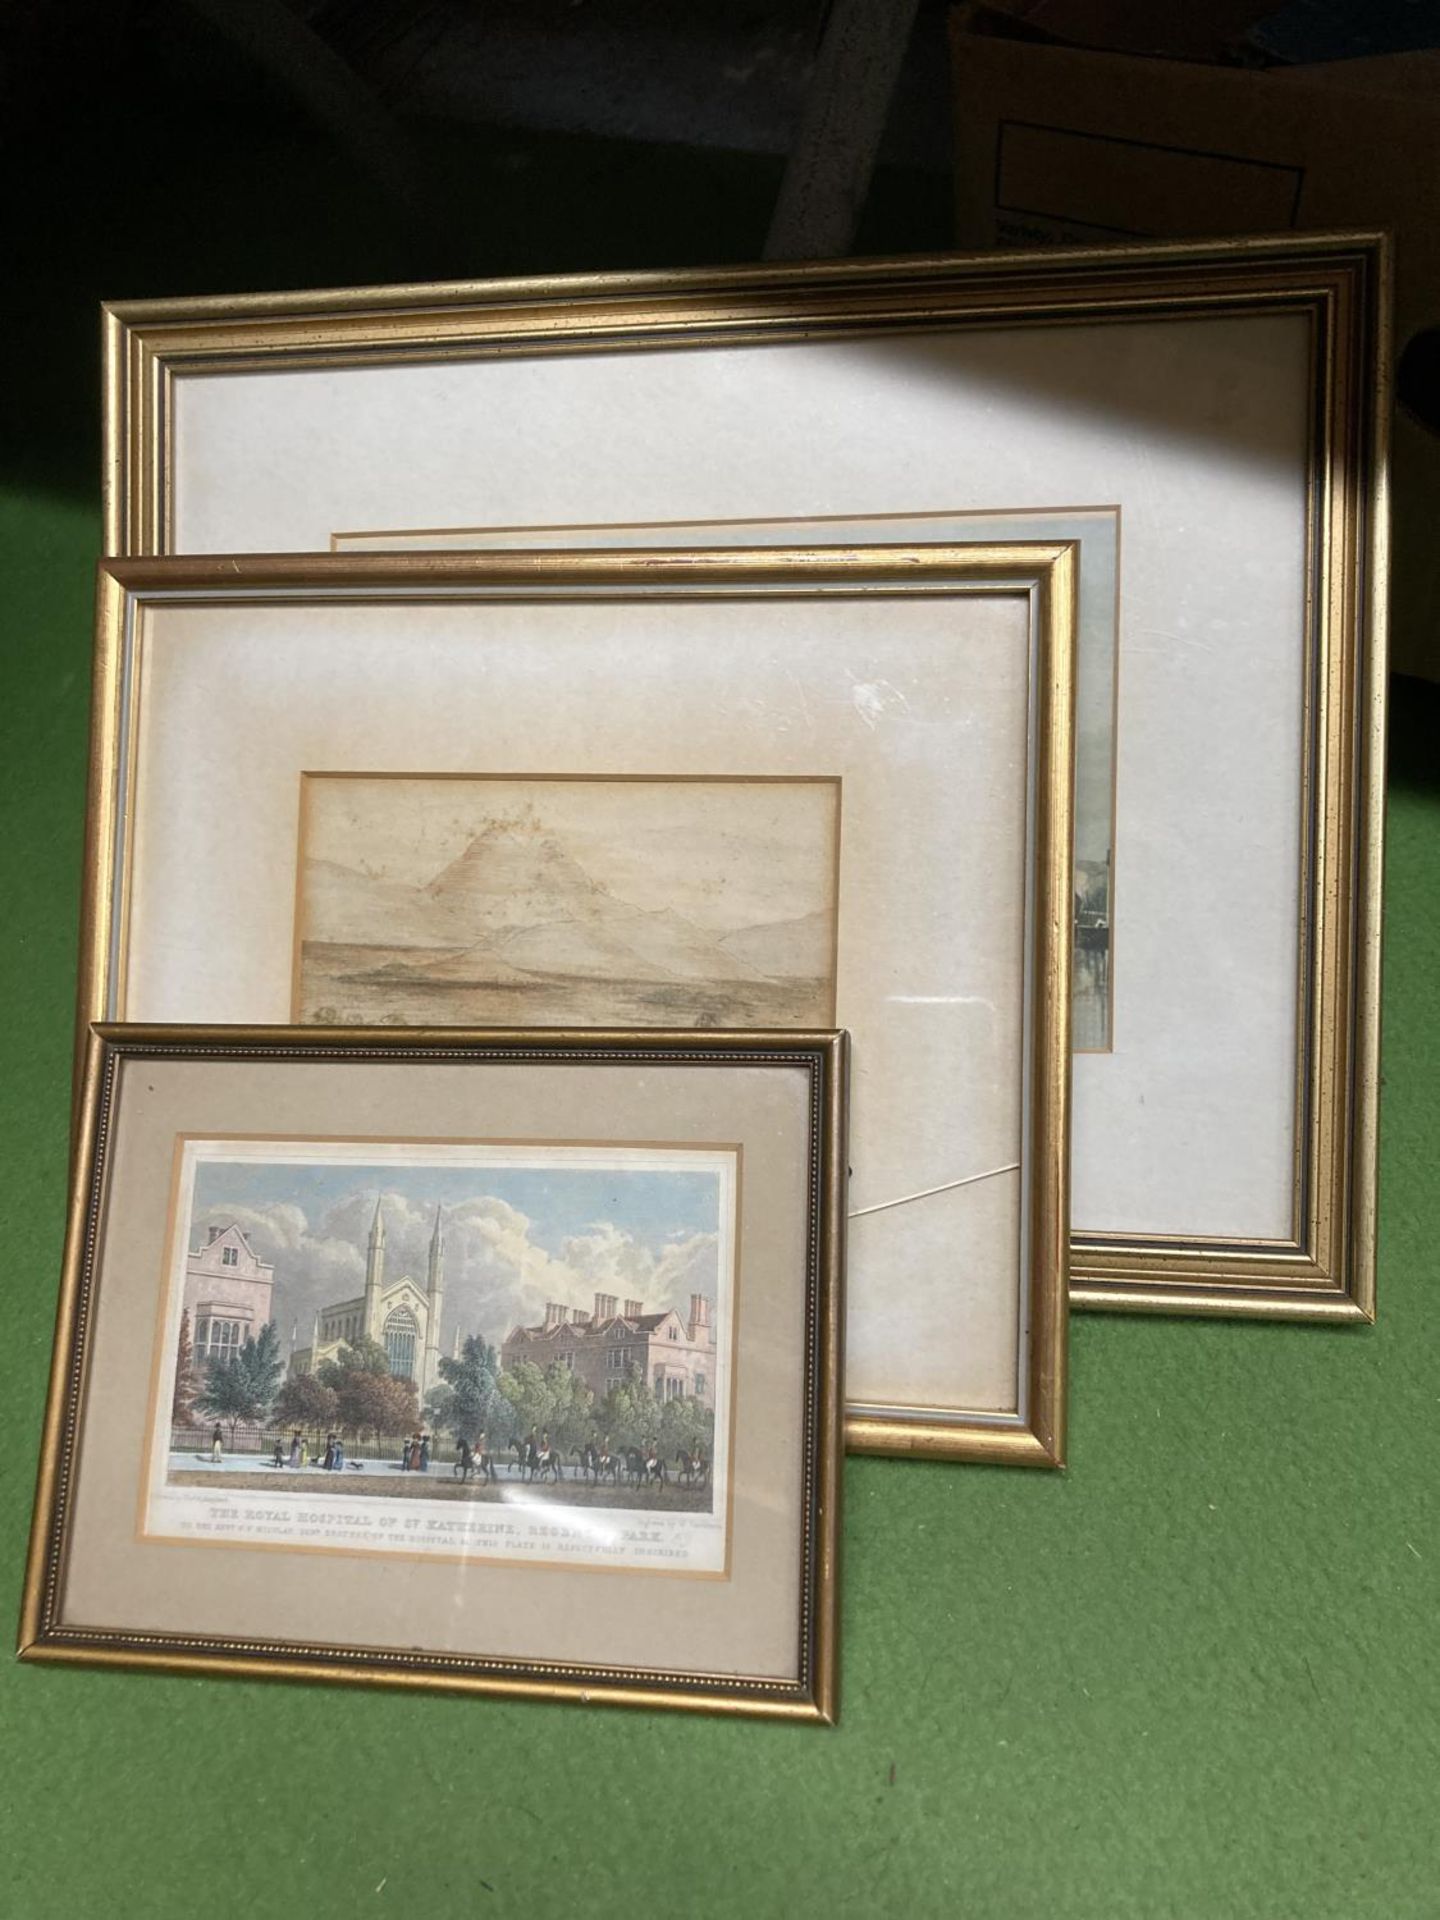 THREE FRAMED PRINTS OF A HARBOUR SCENE, ST KATHERINE'S ROYAL HOSPITAL AND A LAKE SCENE